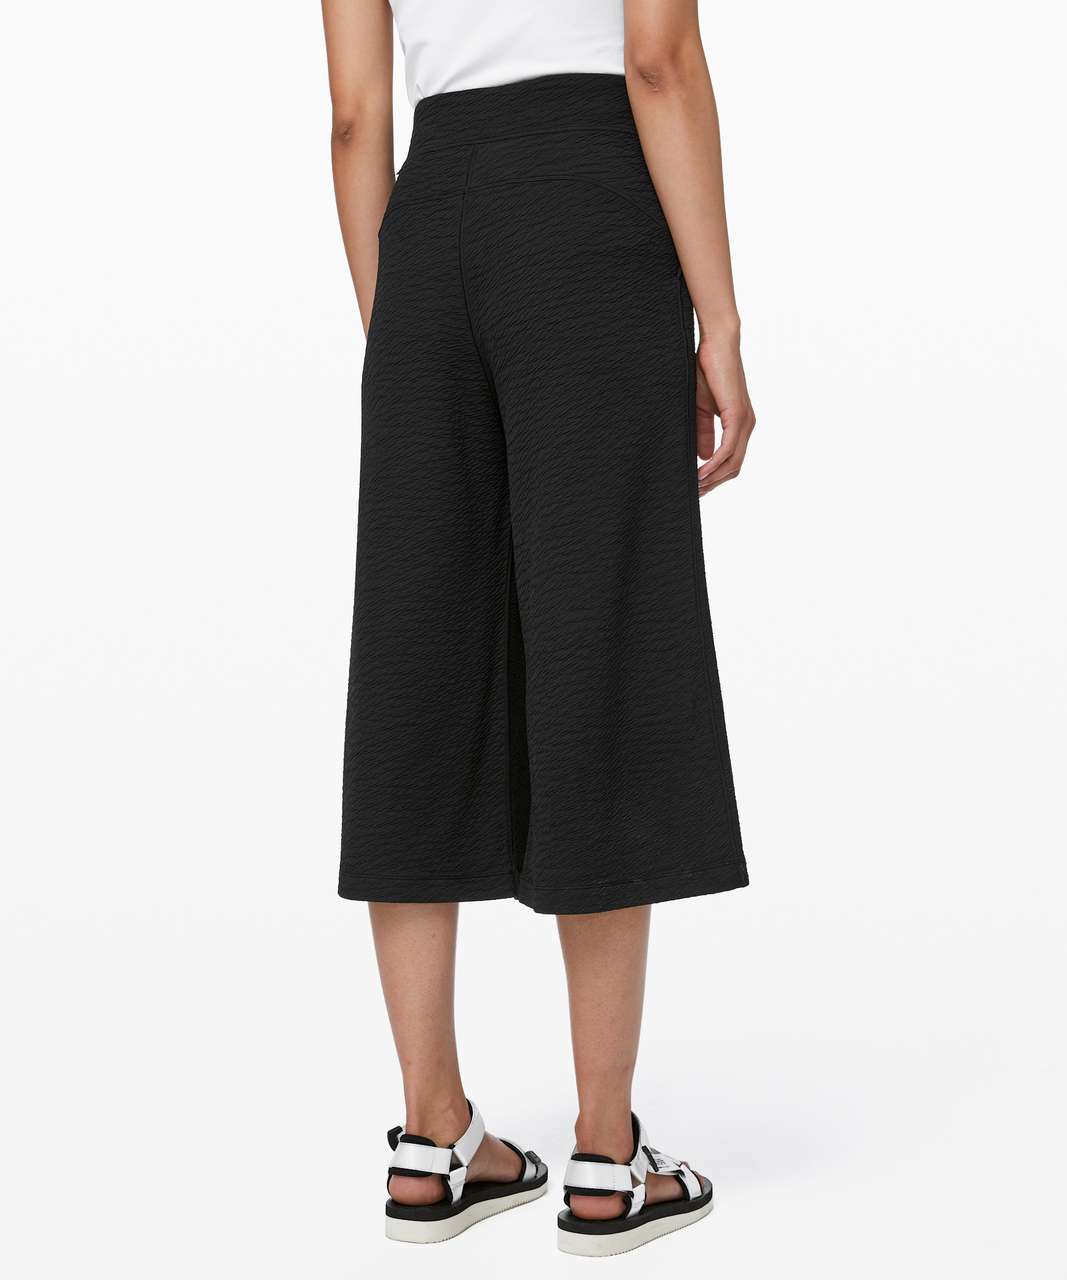 Lululemon Can You Feel The Pleat Crop NWT Black Sizes 2 4 6 8 10 Wide Leg